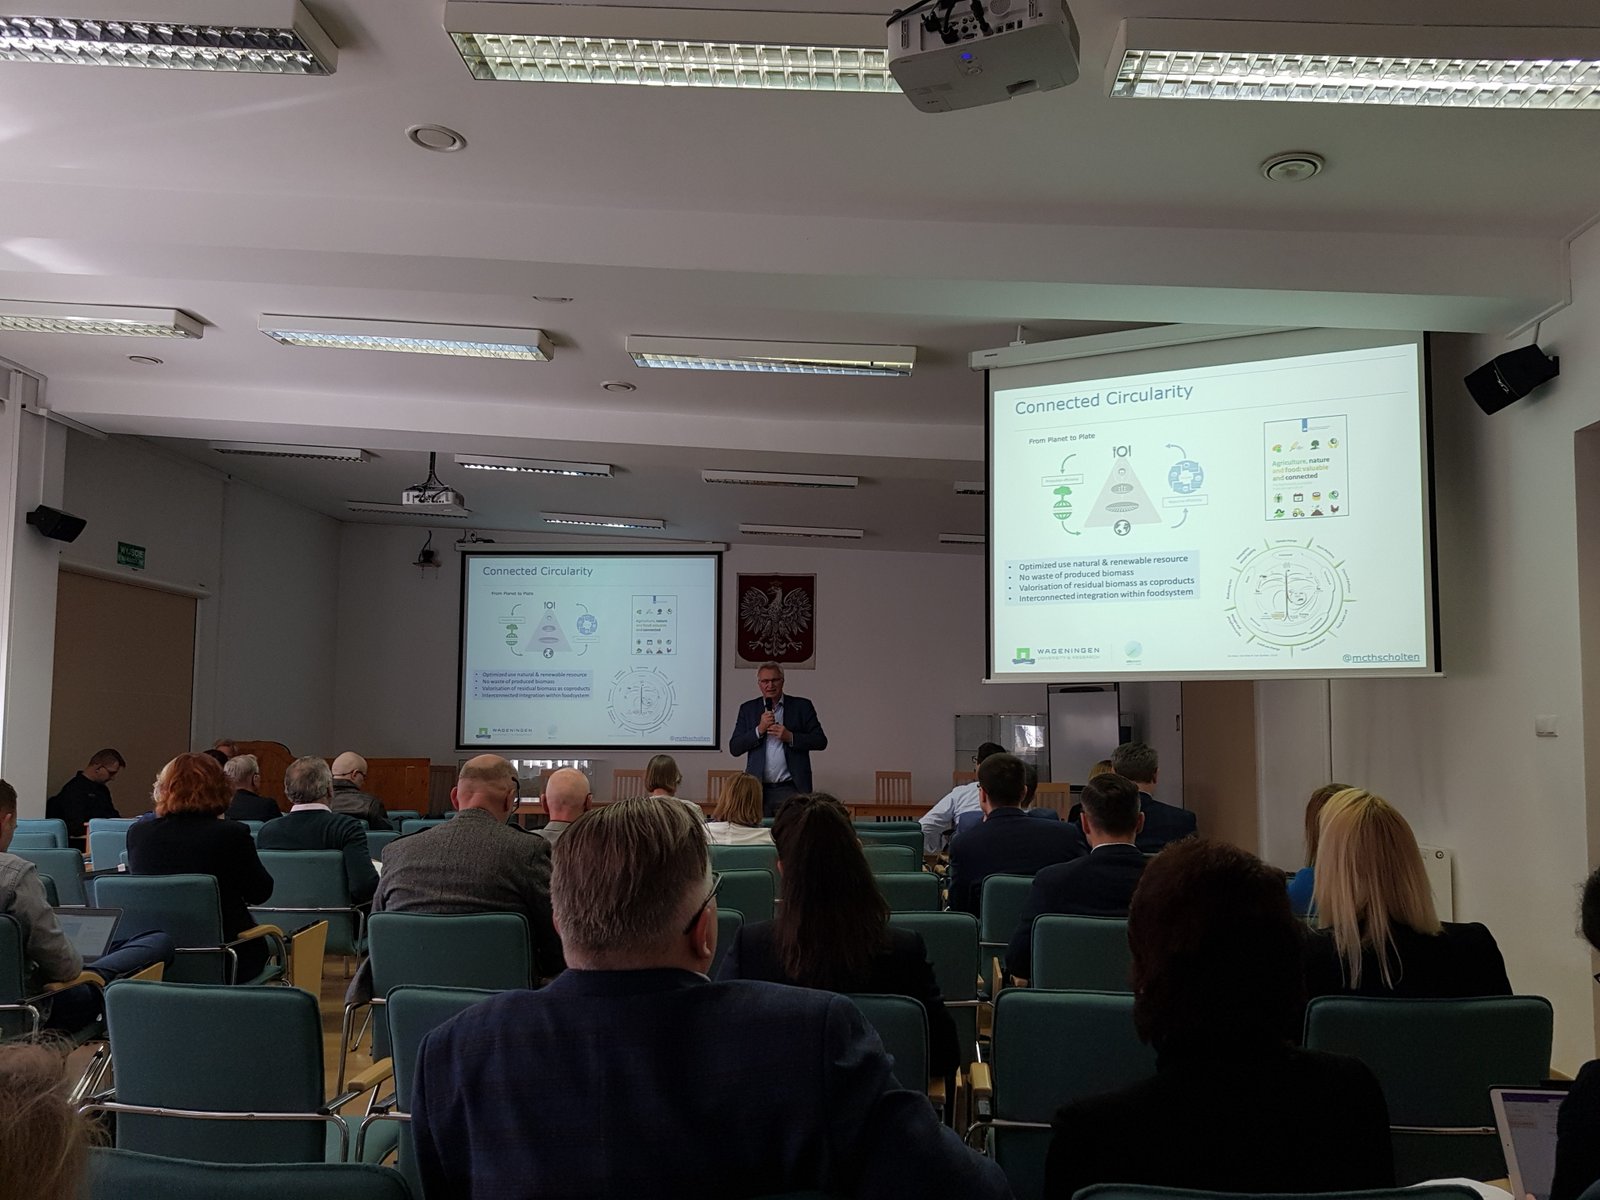 Insides on the Connected Circularity concept by Director Martin Scholten from Wageningen University & Research. Photo by Atanas G. Atanasov (16.04.2019).